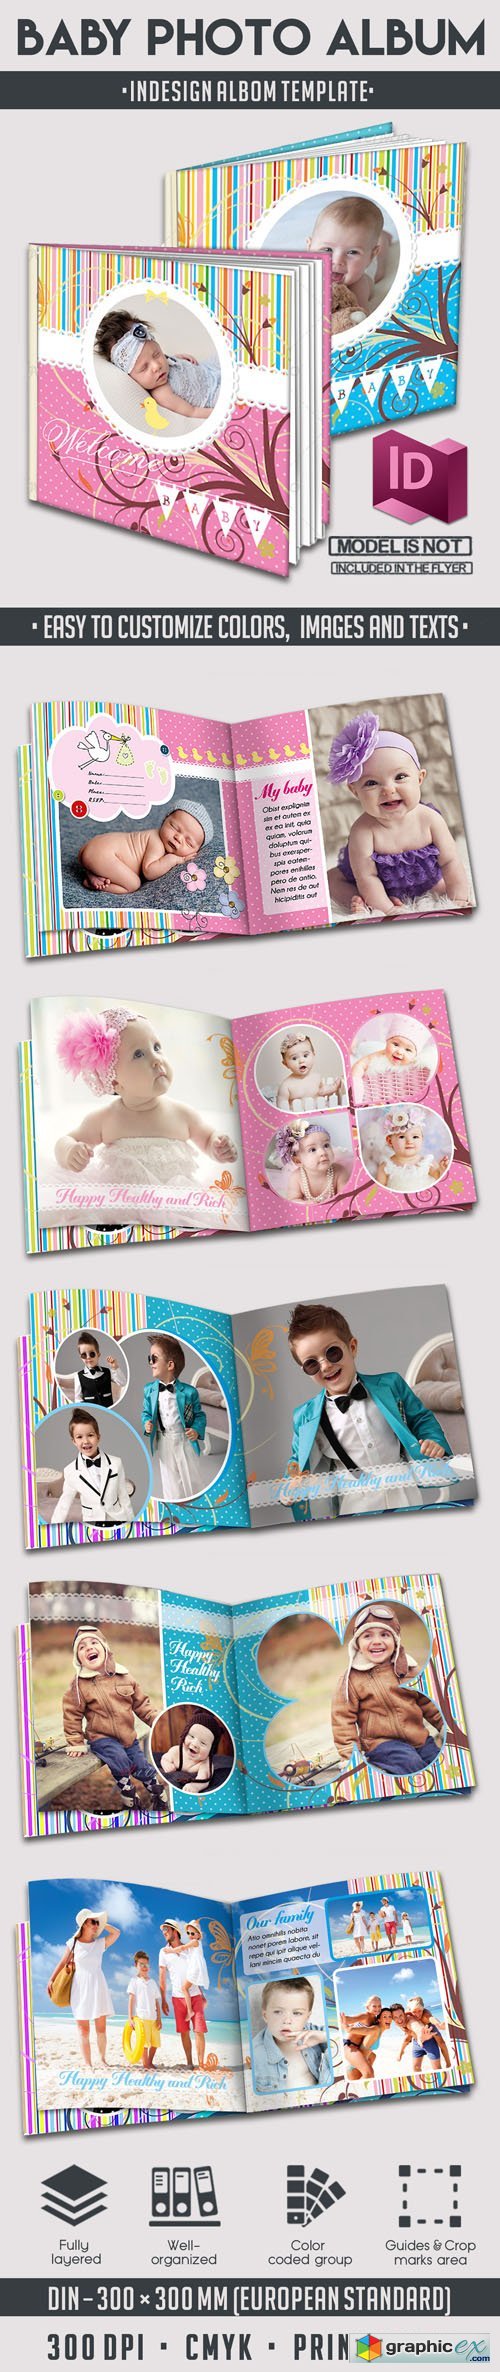 Baby Photo Album INDD - 12 pages